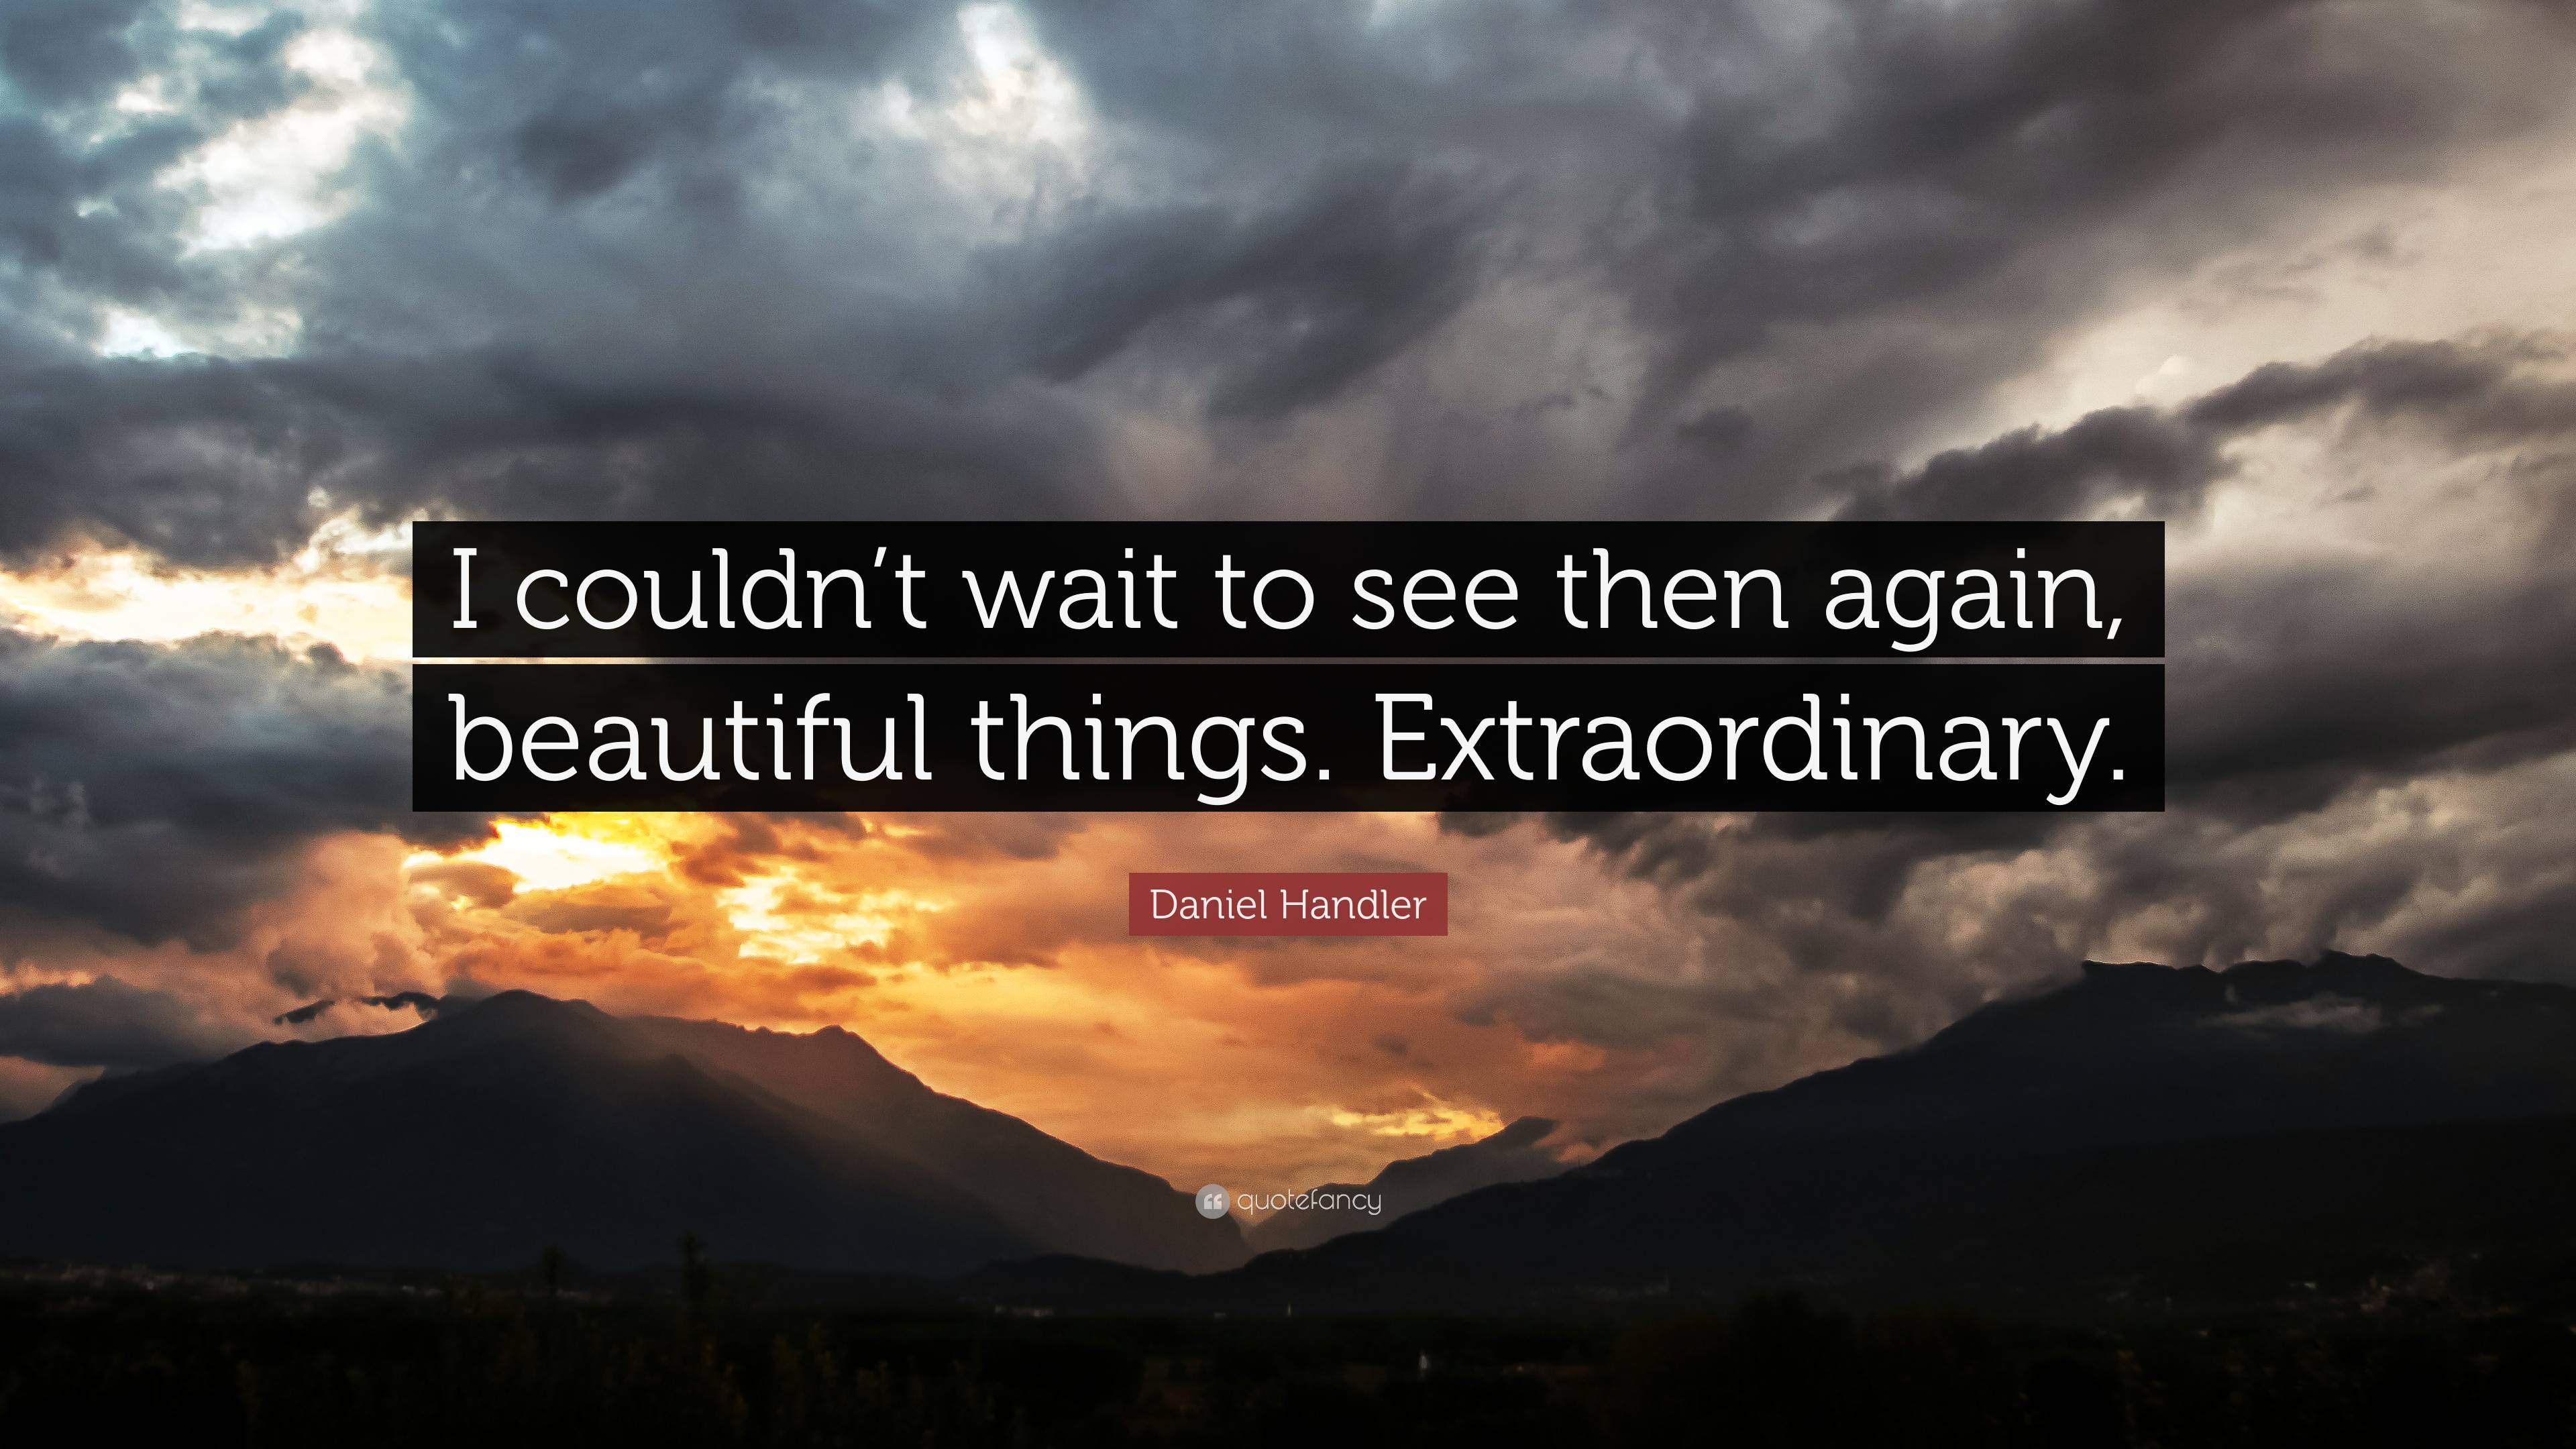 Daniel handler quote âi couldnt wait to see then again beautiful things extraordinaryâ